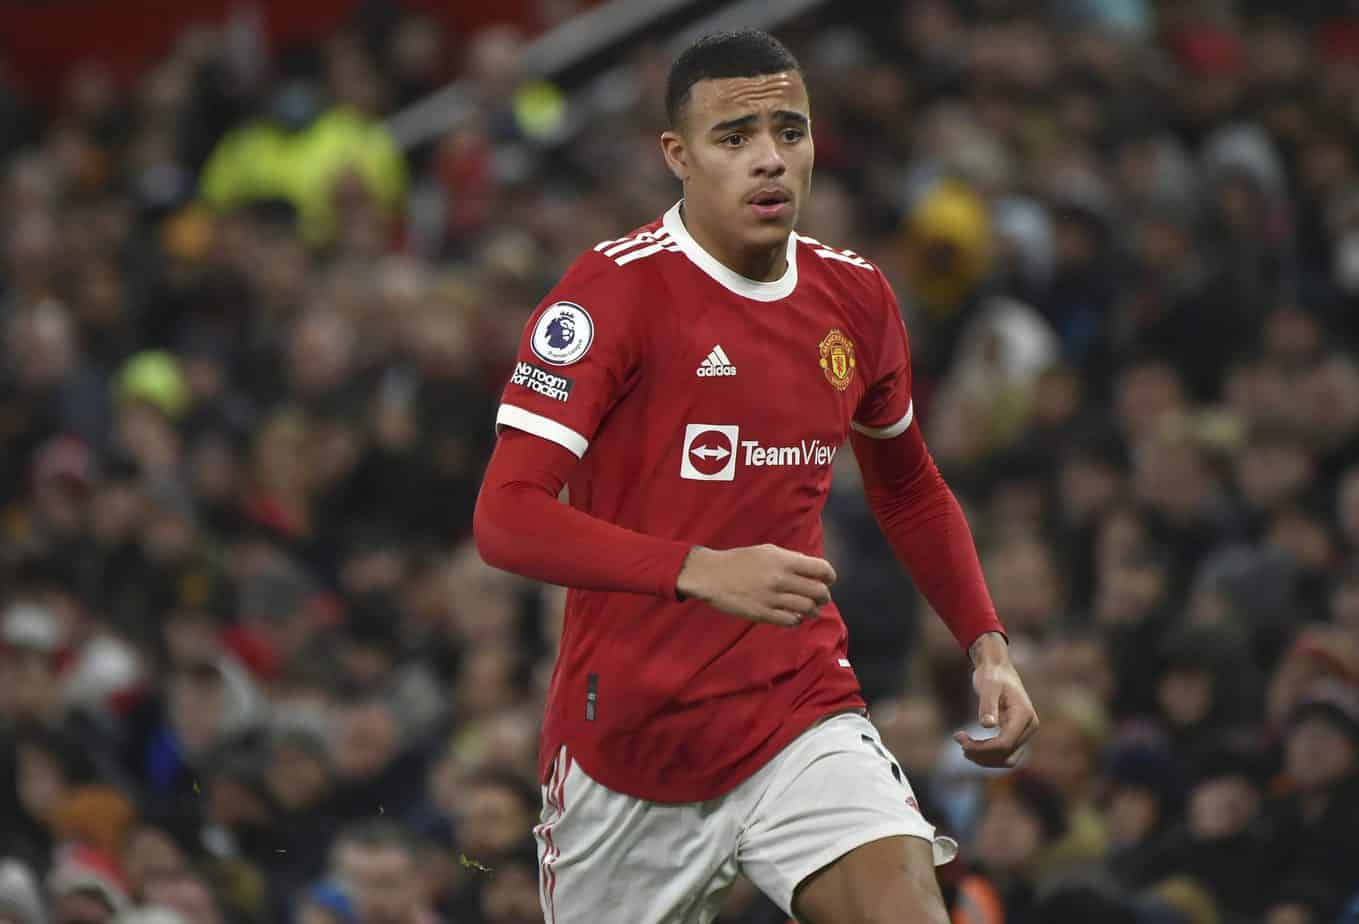 Nike announced that they have suspended their relationship with Manchester United's Mason Greenwood following the extremely disturbing social media allegation